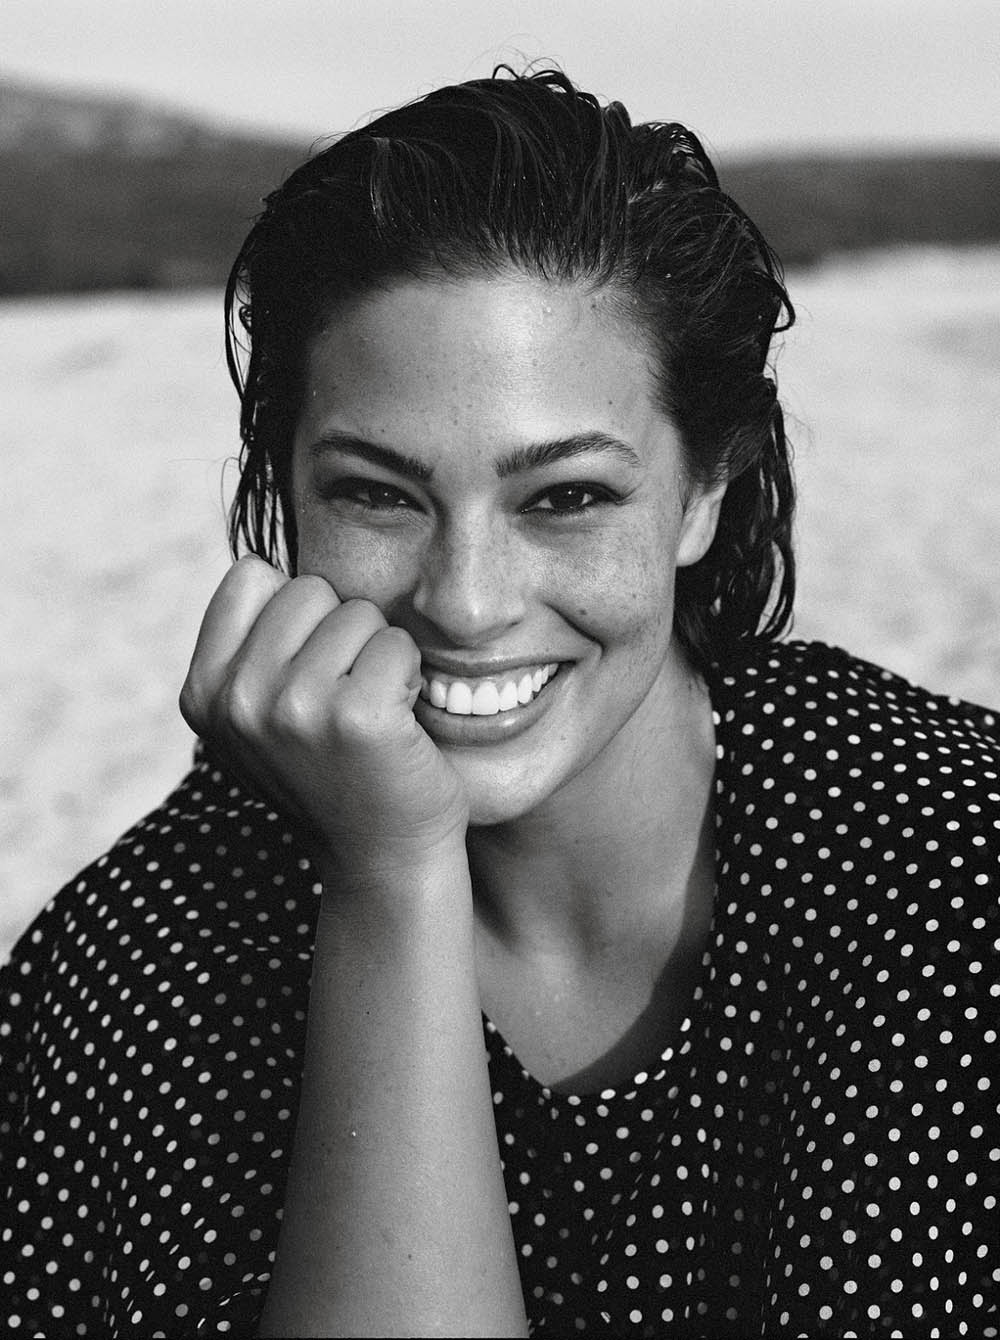 Ashley Graham by Lachlan Bailey for Vogue Paris November 2018